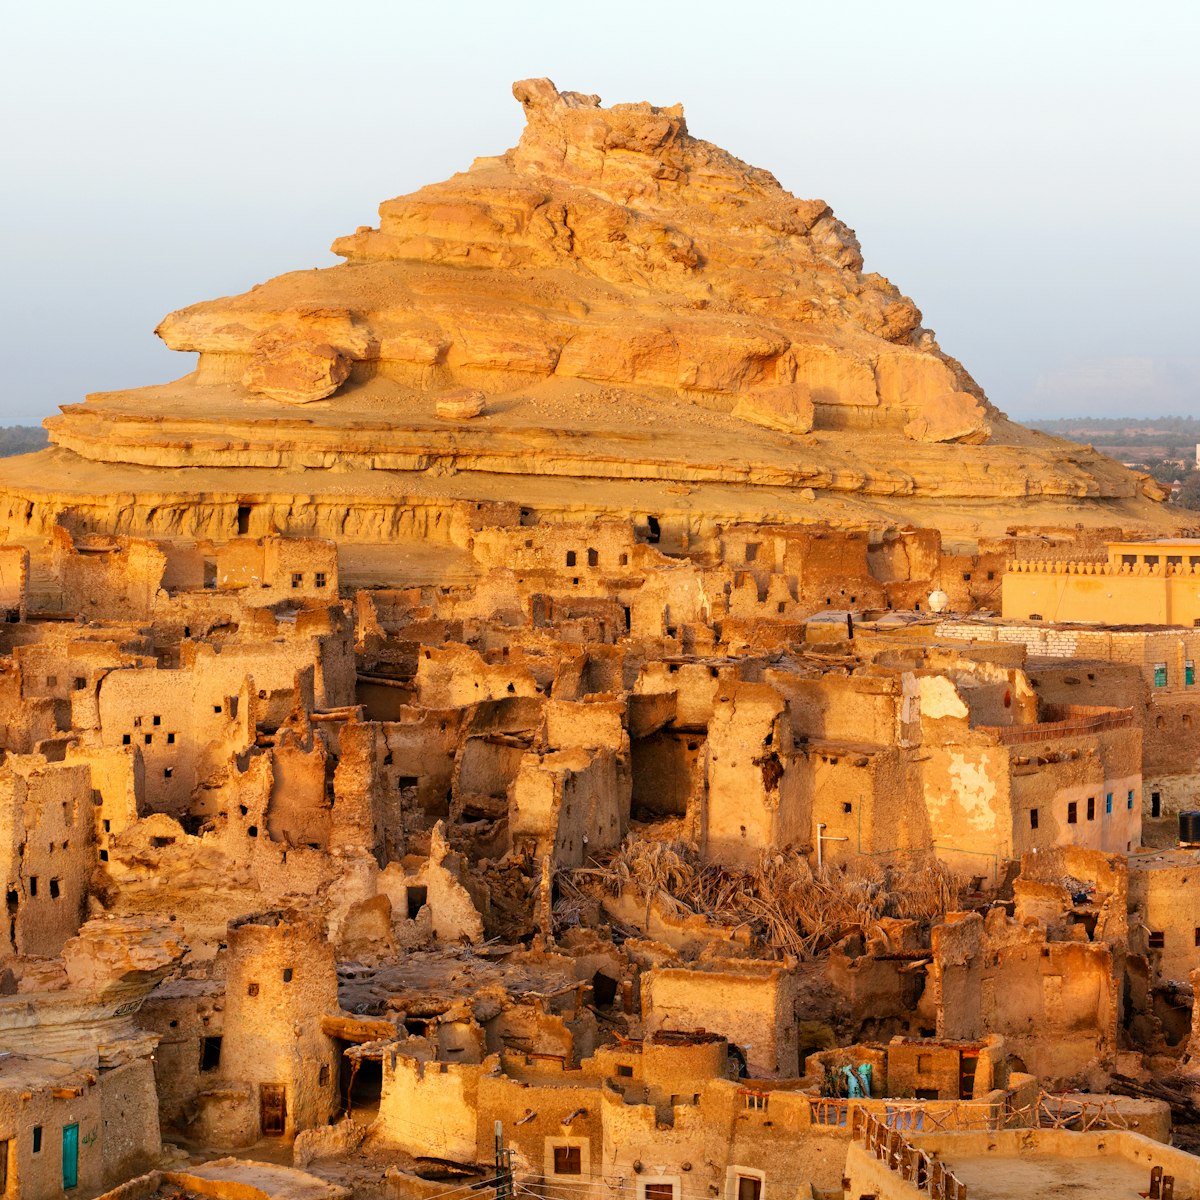 The Shali Fortress in Siwa Oasis, Egypt.